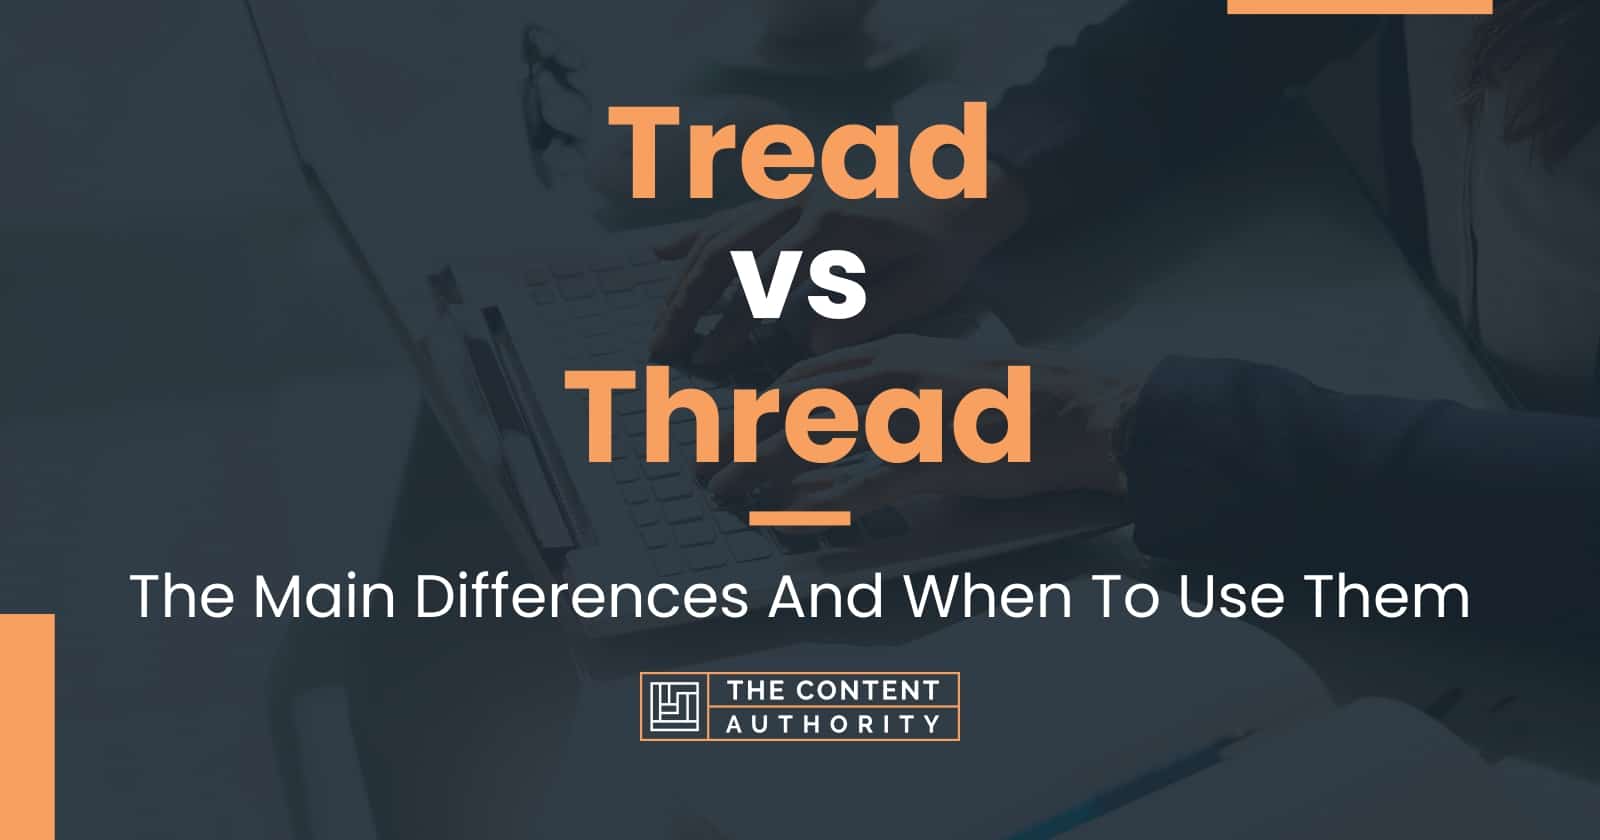 Tread vs Thread: The Main Differences And When To Use Them